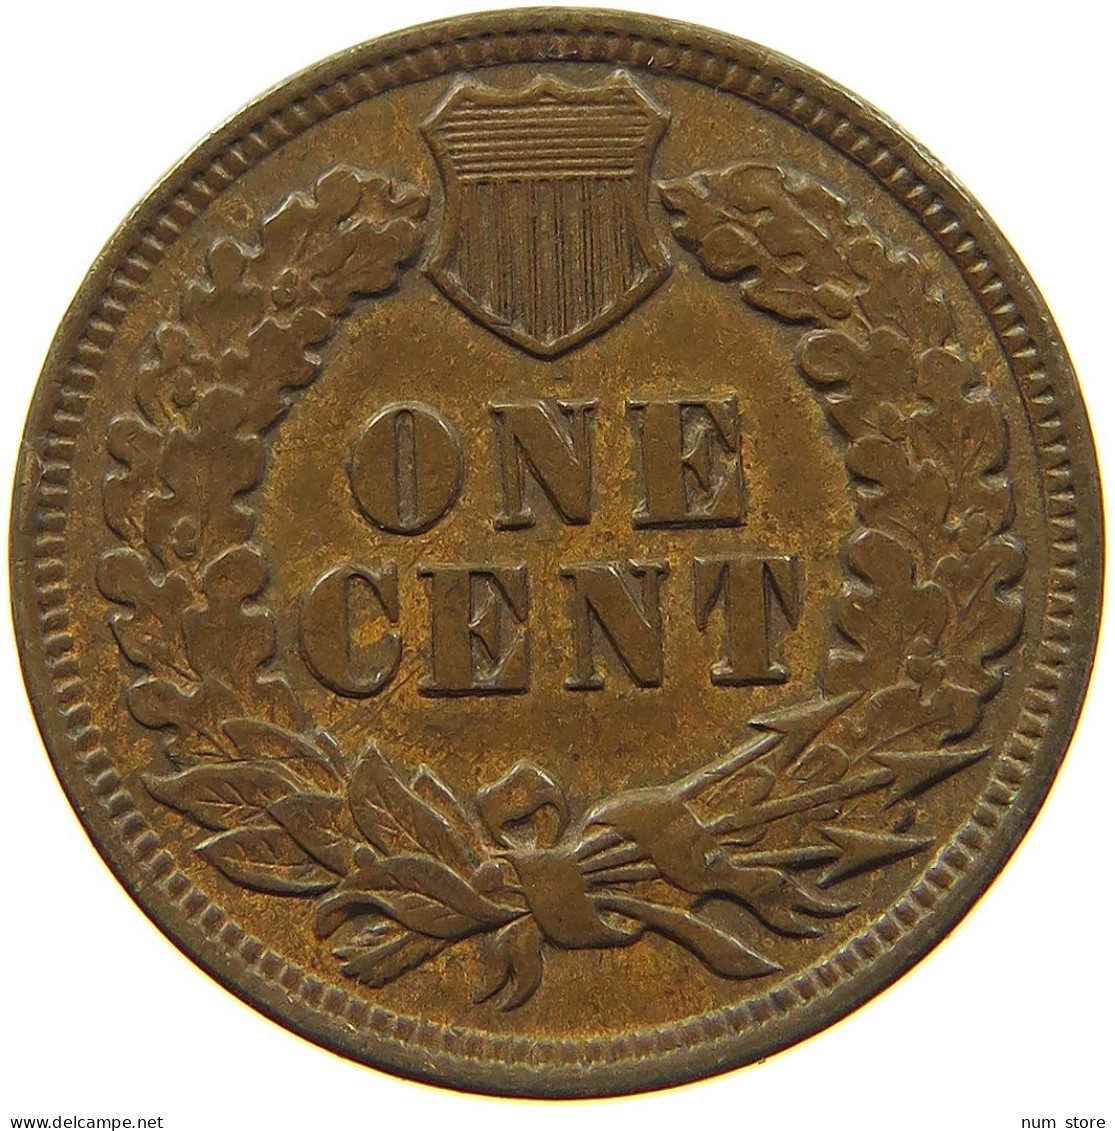 UNITED STATES OF AMERICA CENT 1903 INDIAN #s083 0575 - 1859-1909: Indian Head